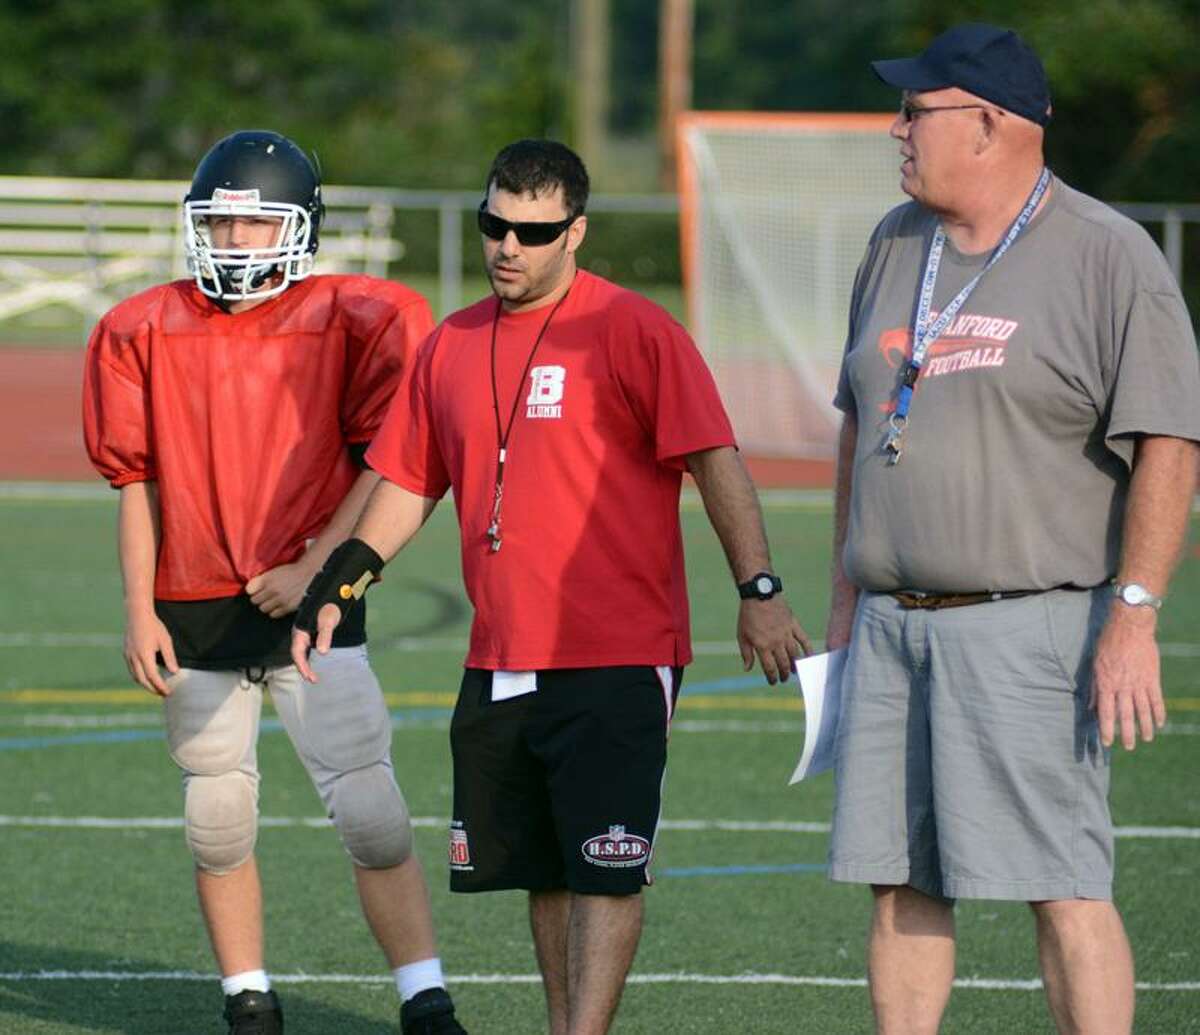 John Limone, center, leads a recent Branford football practice. Dave Phillips/File Photo